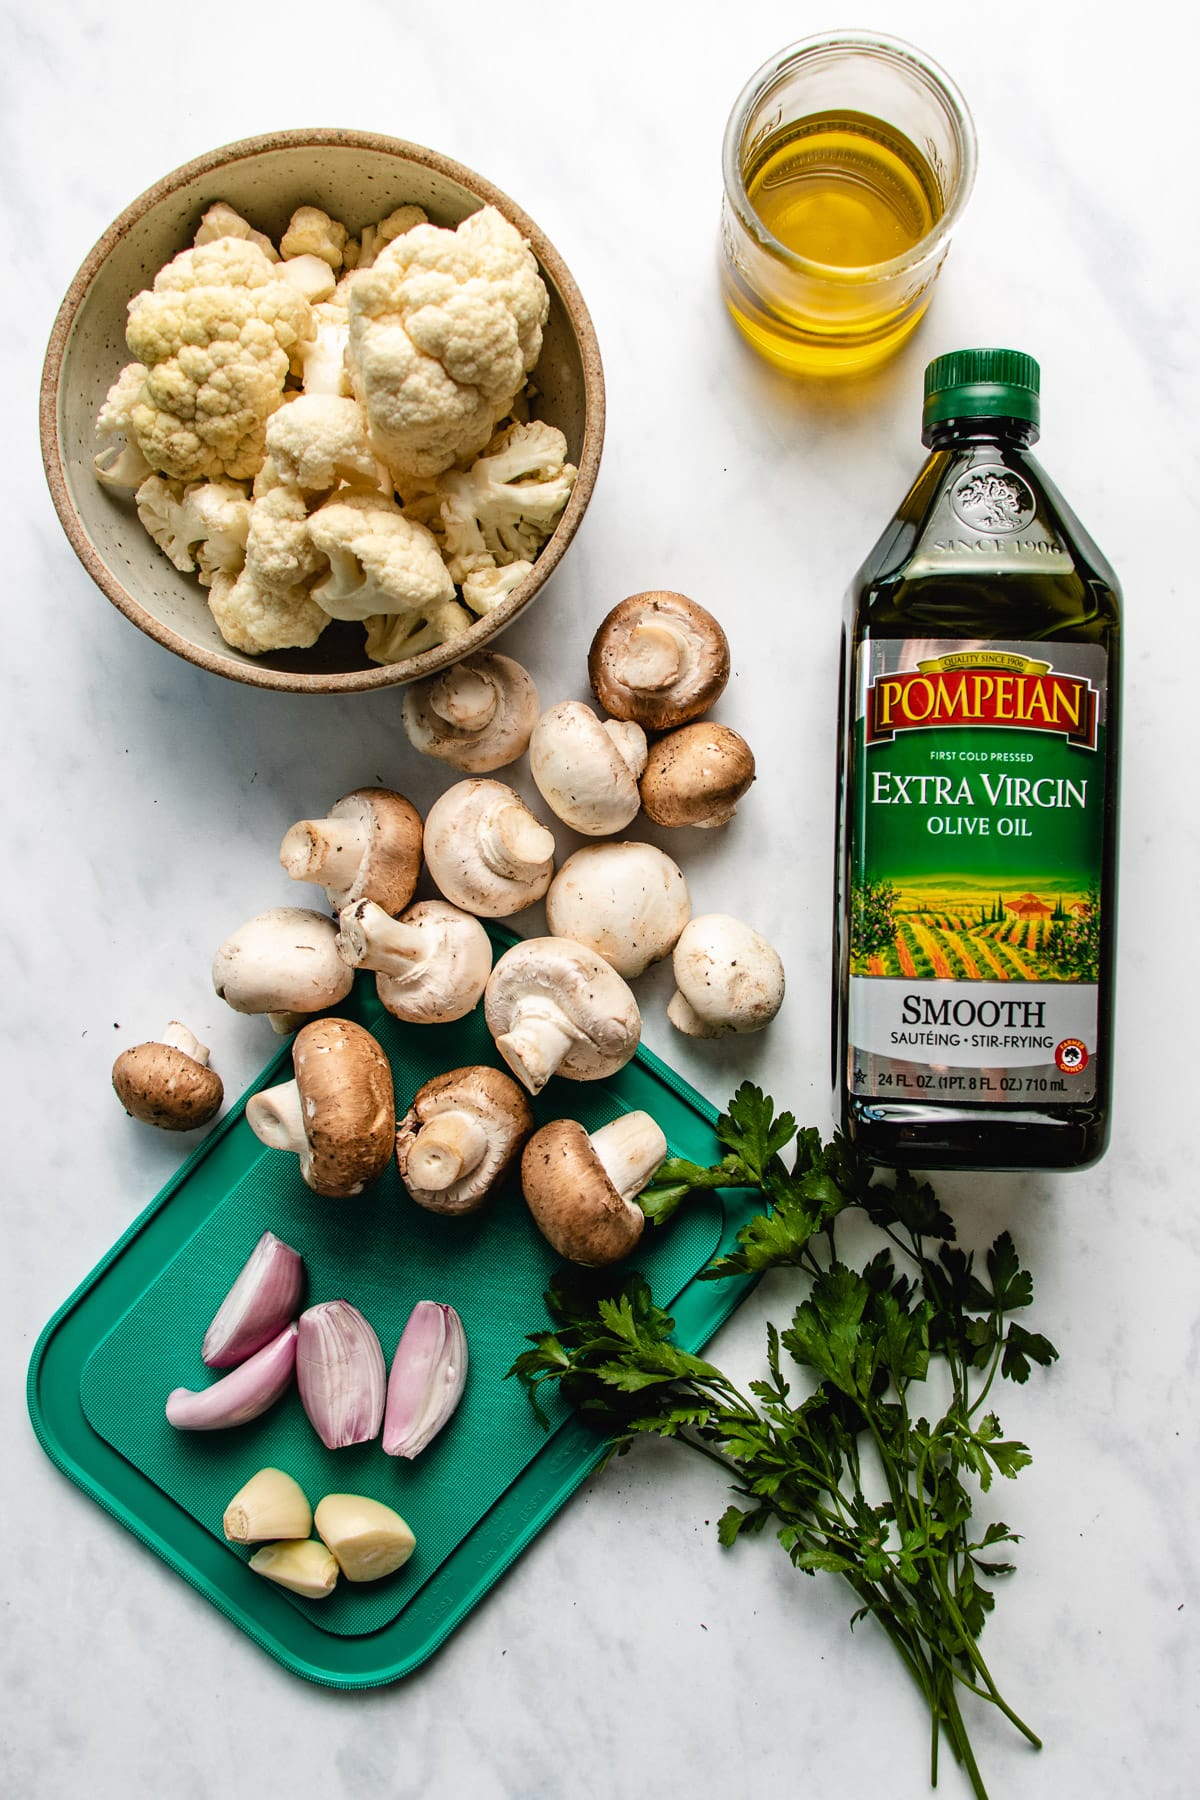 Photo shows ingredients needed to make the dish with mushrooms, cauliflower, garlic, shallot, parsley, and olive oil